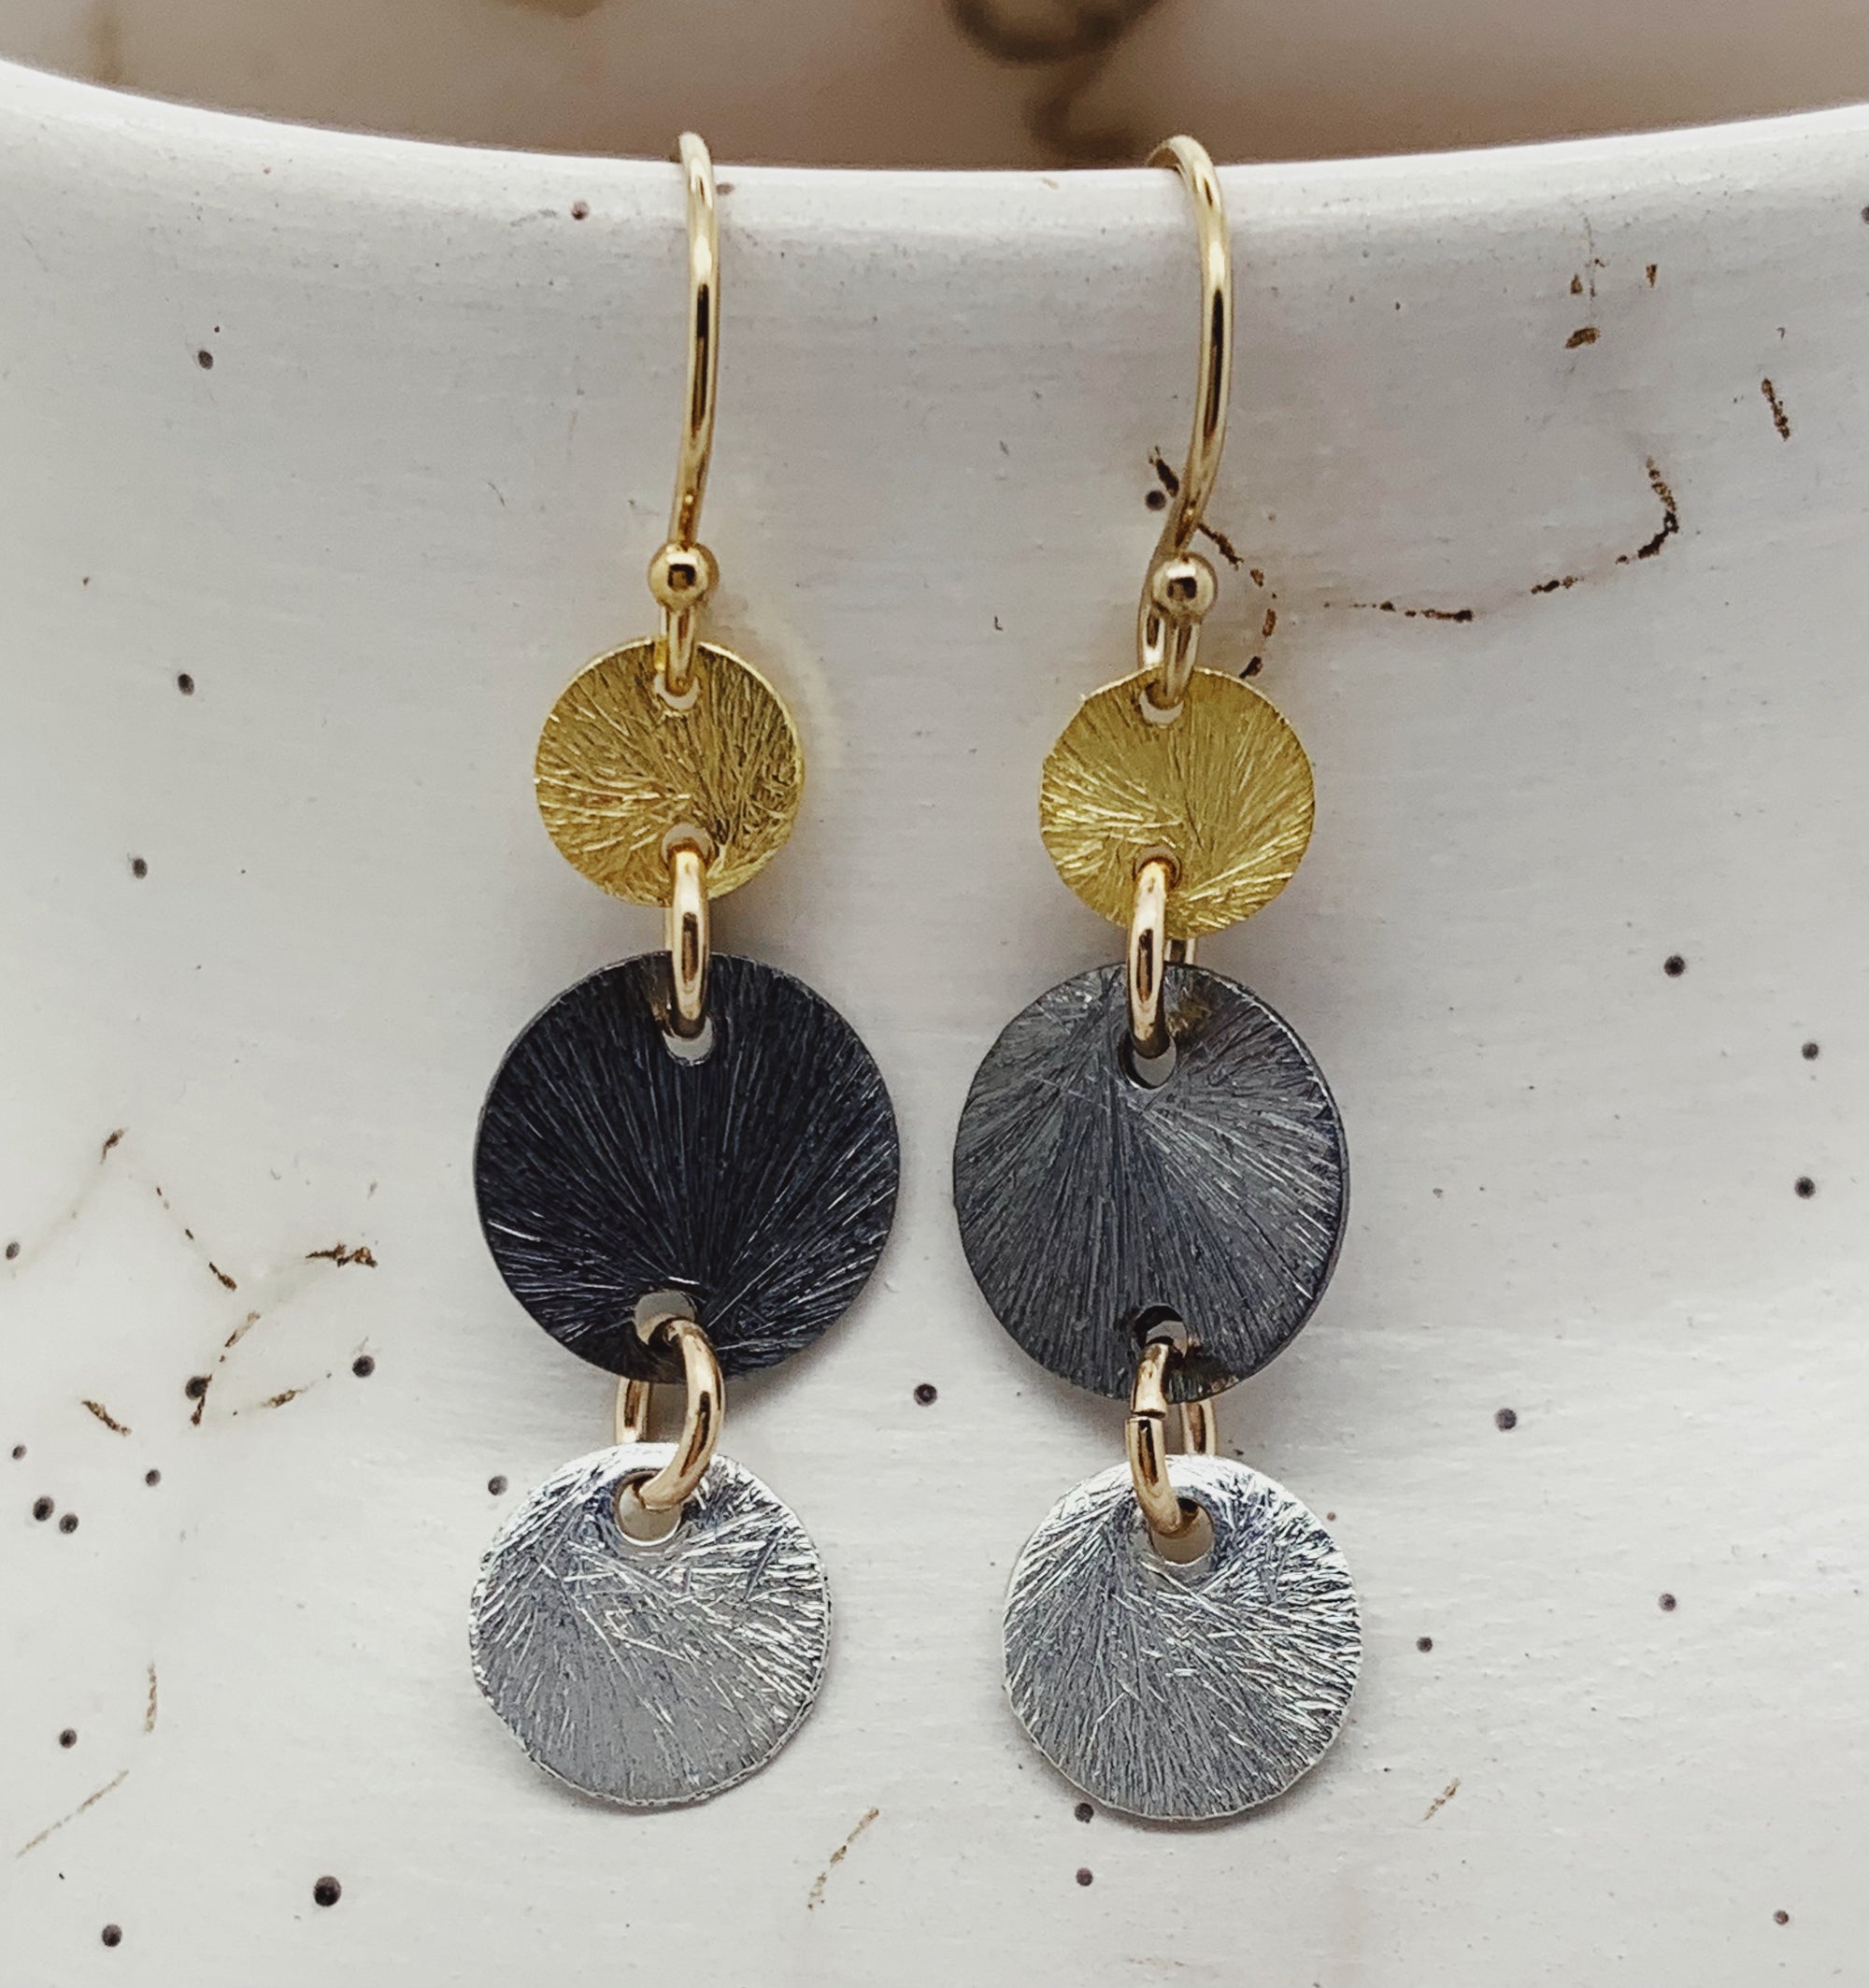 Connect The Dots Earrings